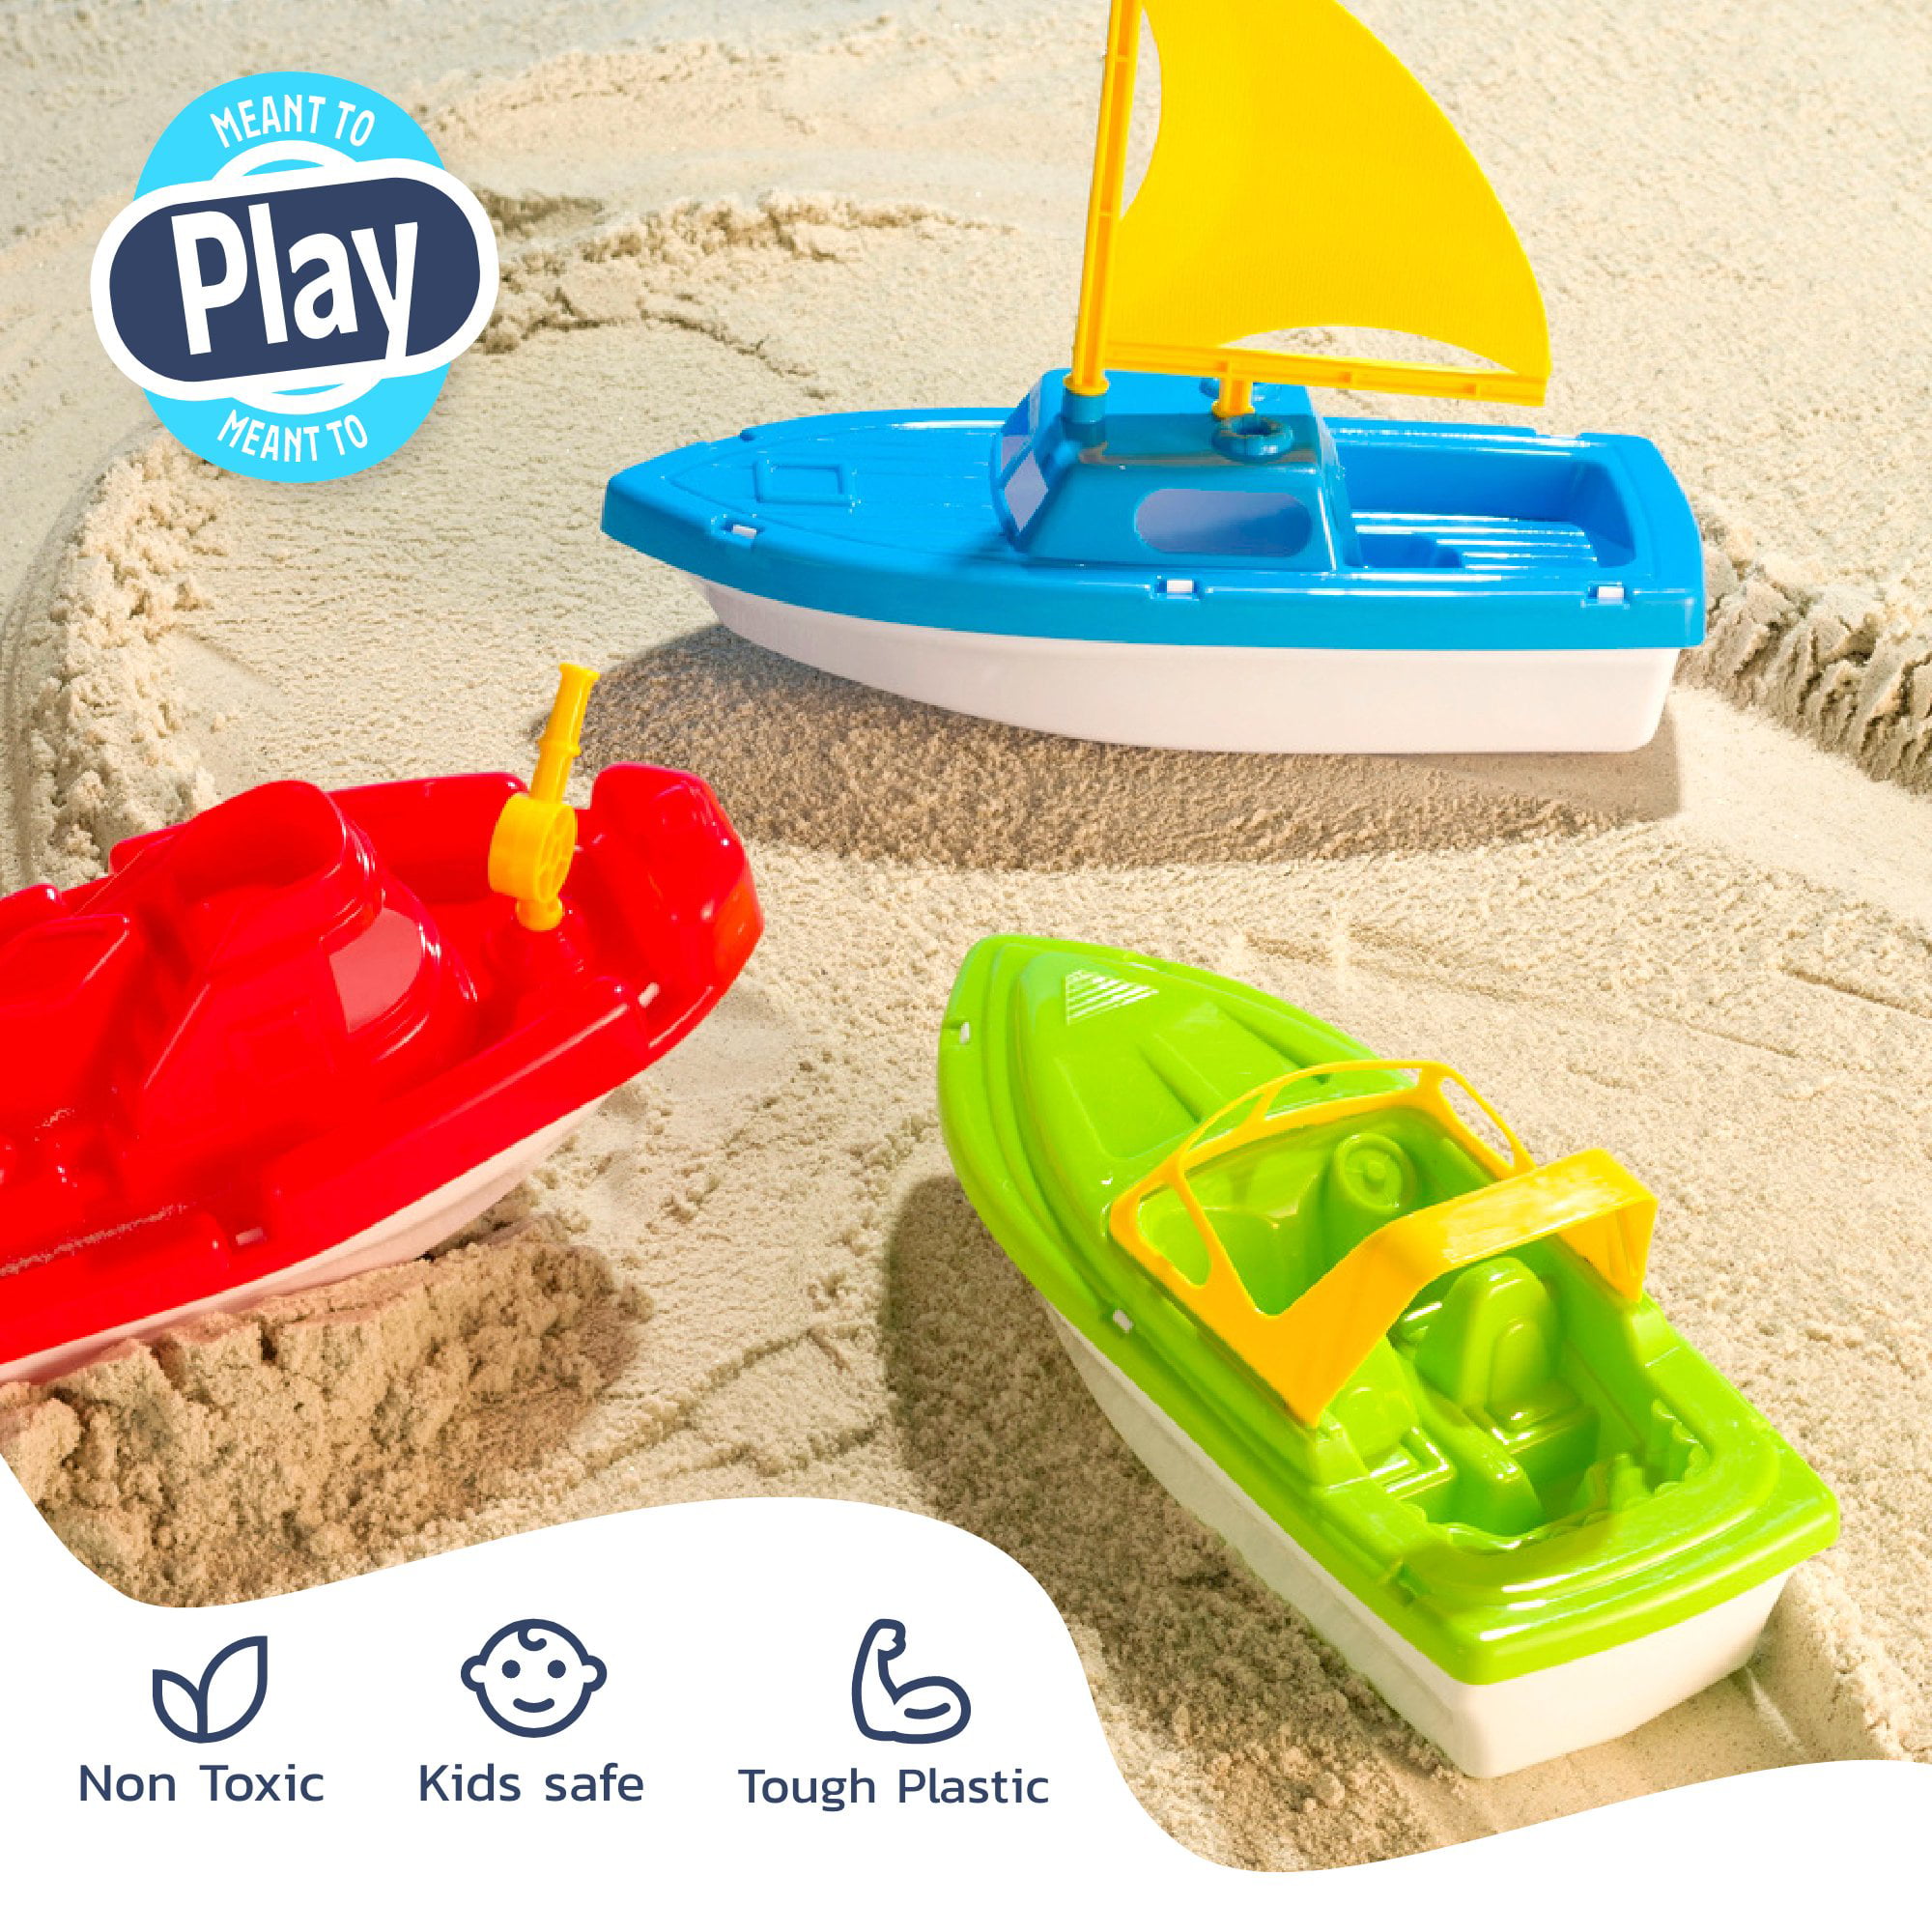 Toy Boat Bath Toys - Childrens Toy Boat Combo 3 Pack Kids Beach Toys Set of  3 Includes x1 Sail Boat, x1 Speed Boat, and x1 Tugboat Toy Boat Combo for